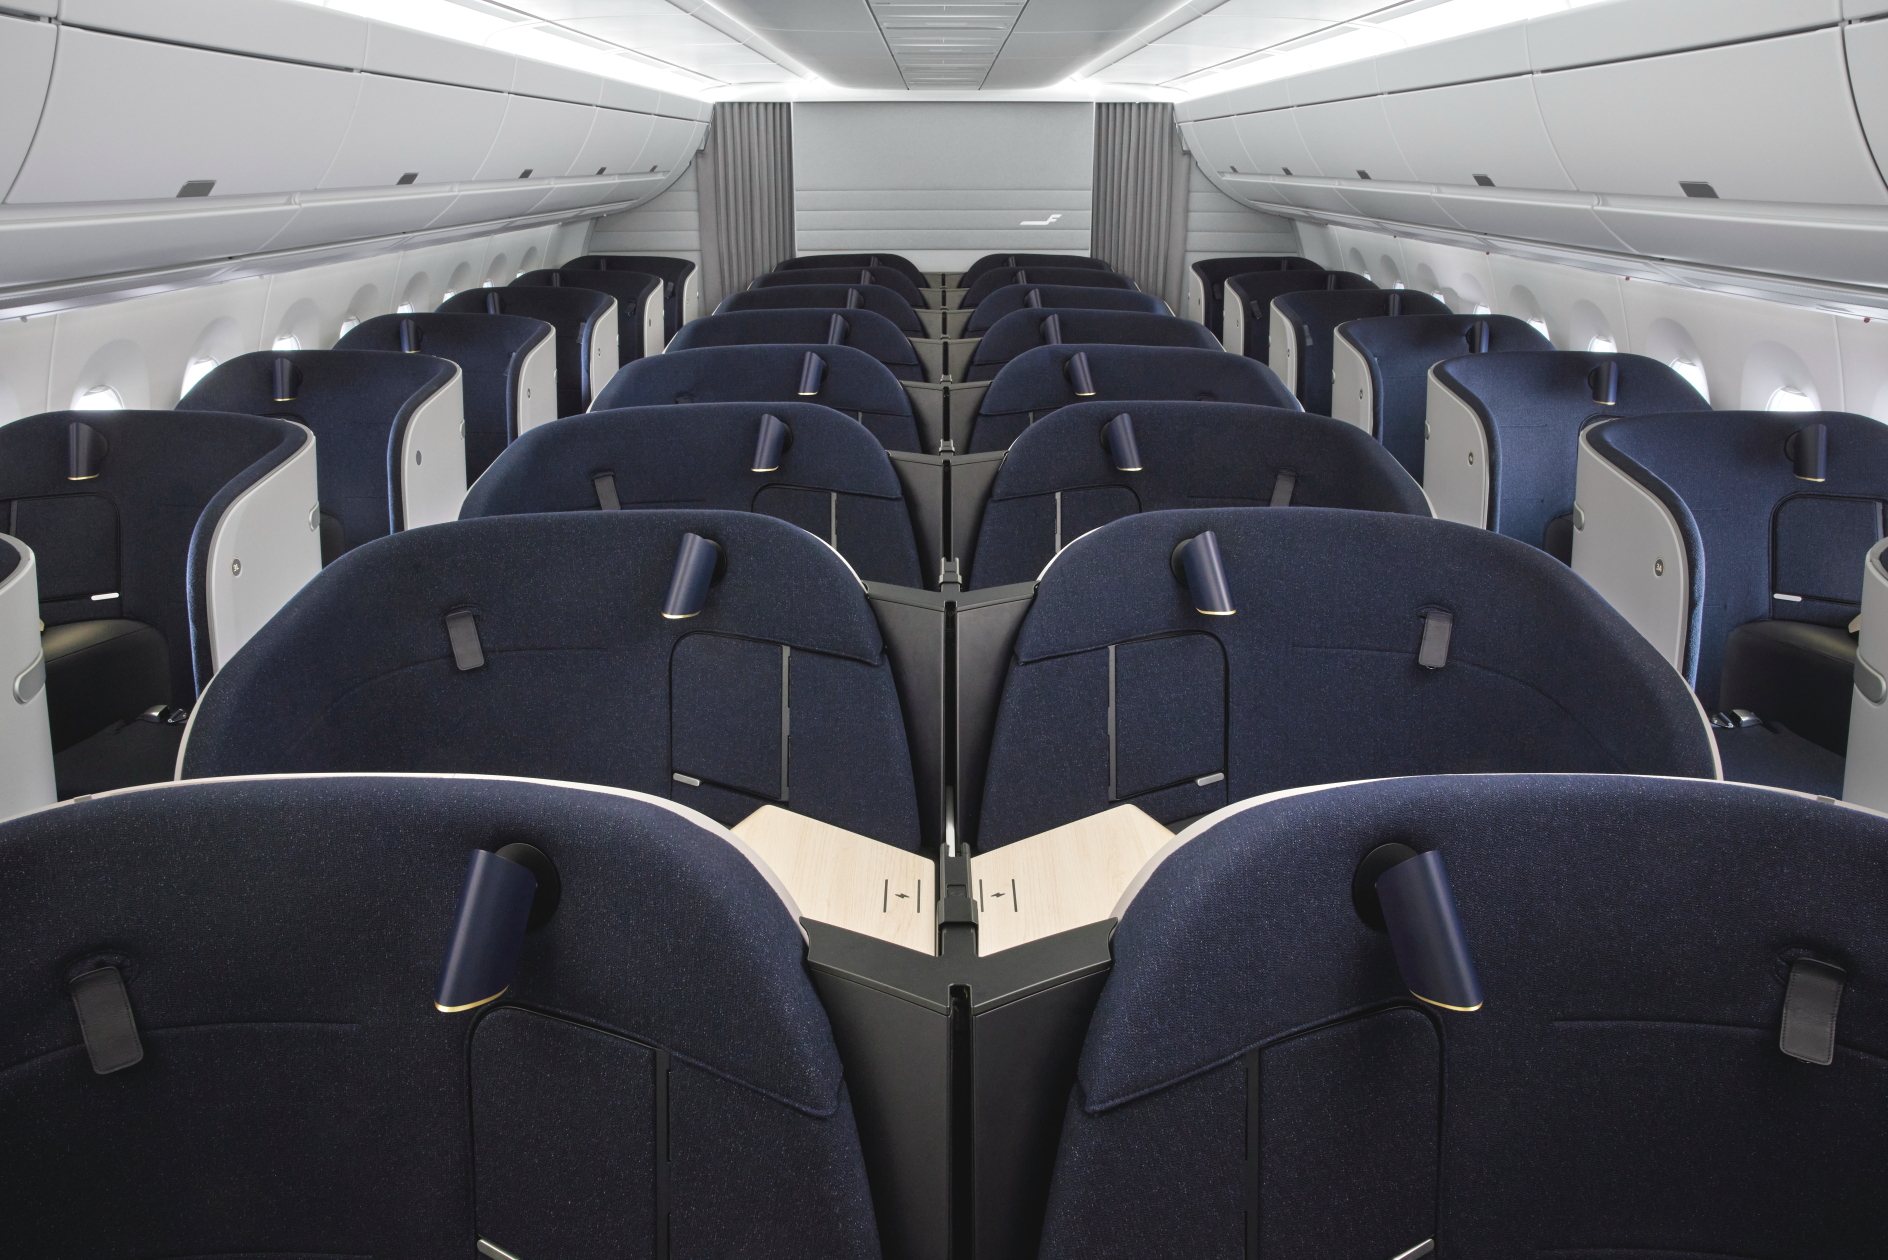 Finnair's new long-haul Business Class. Click to enlarge.